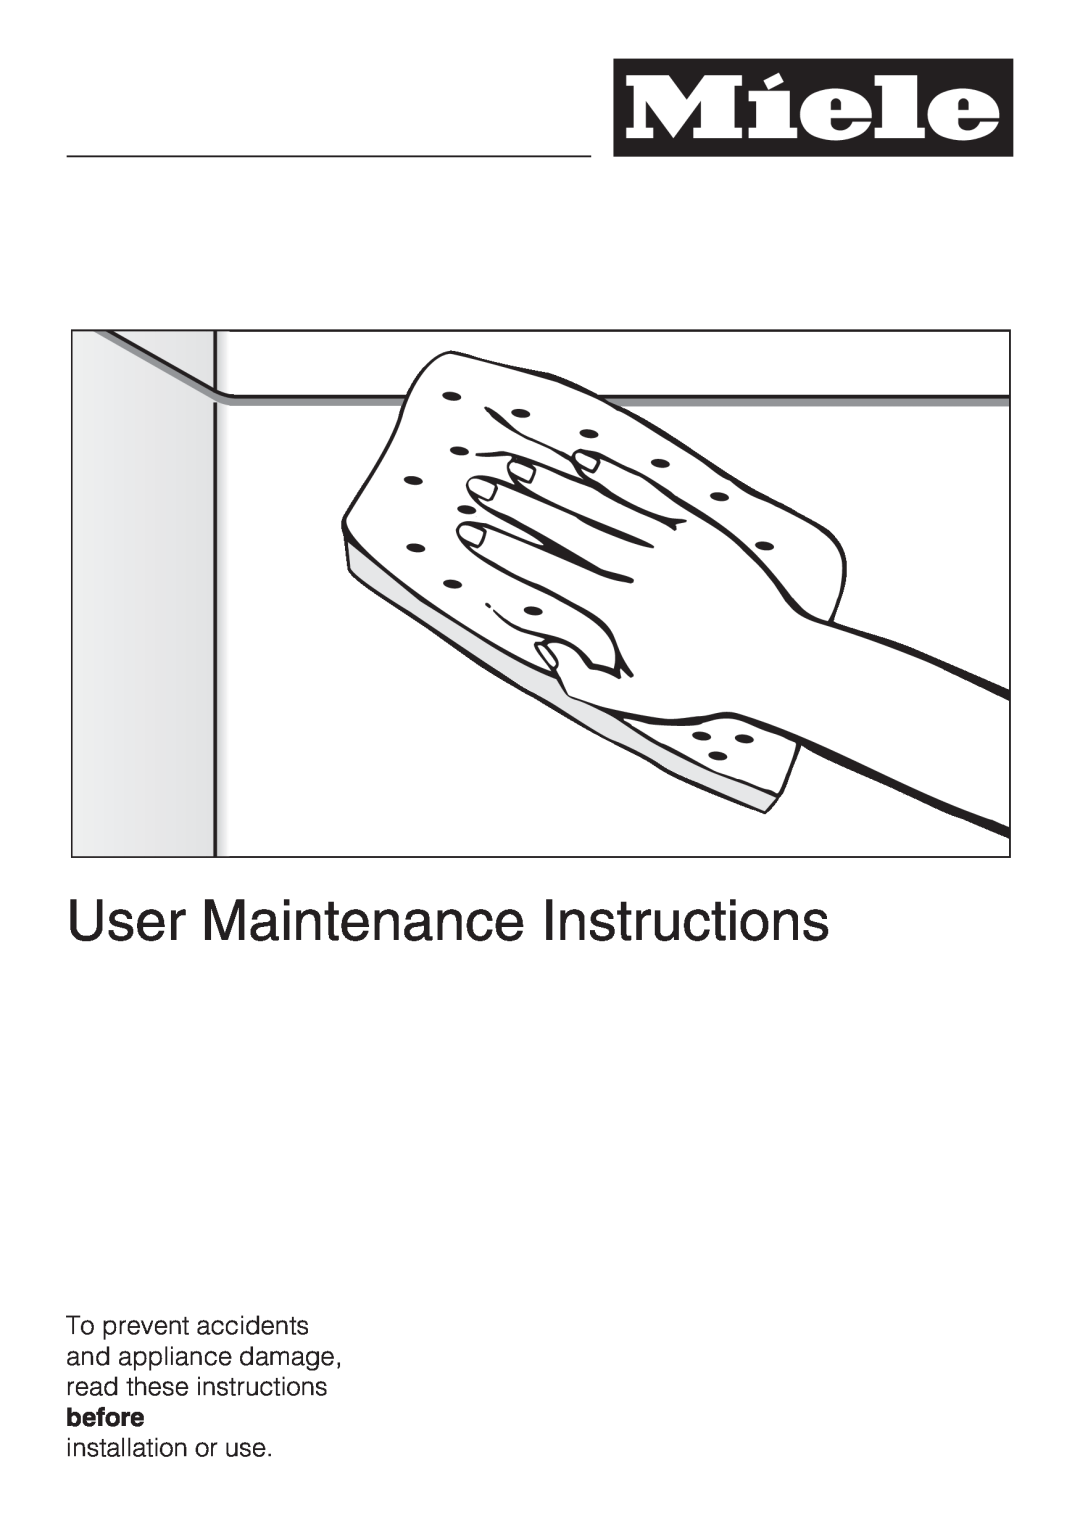 Miele G 2143 manual User Maintenance Instructions, installation or use 